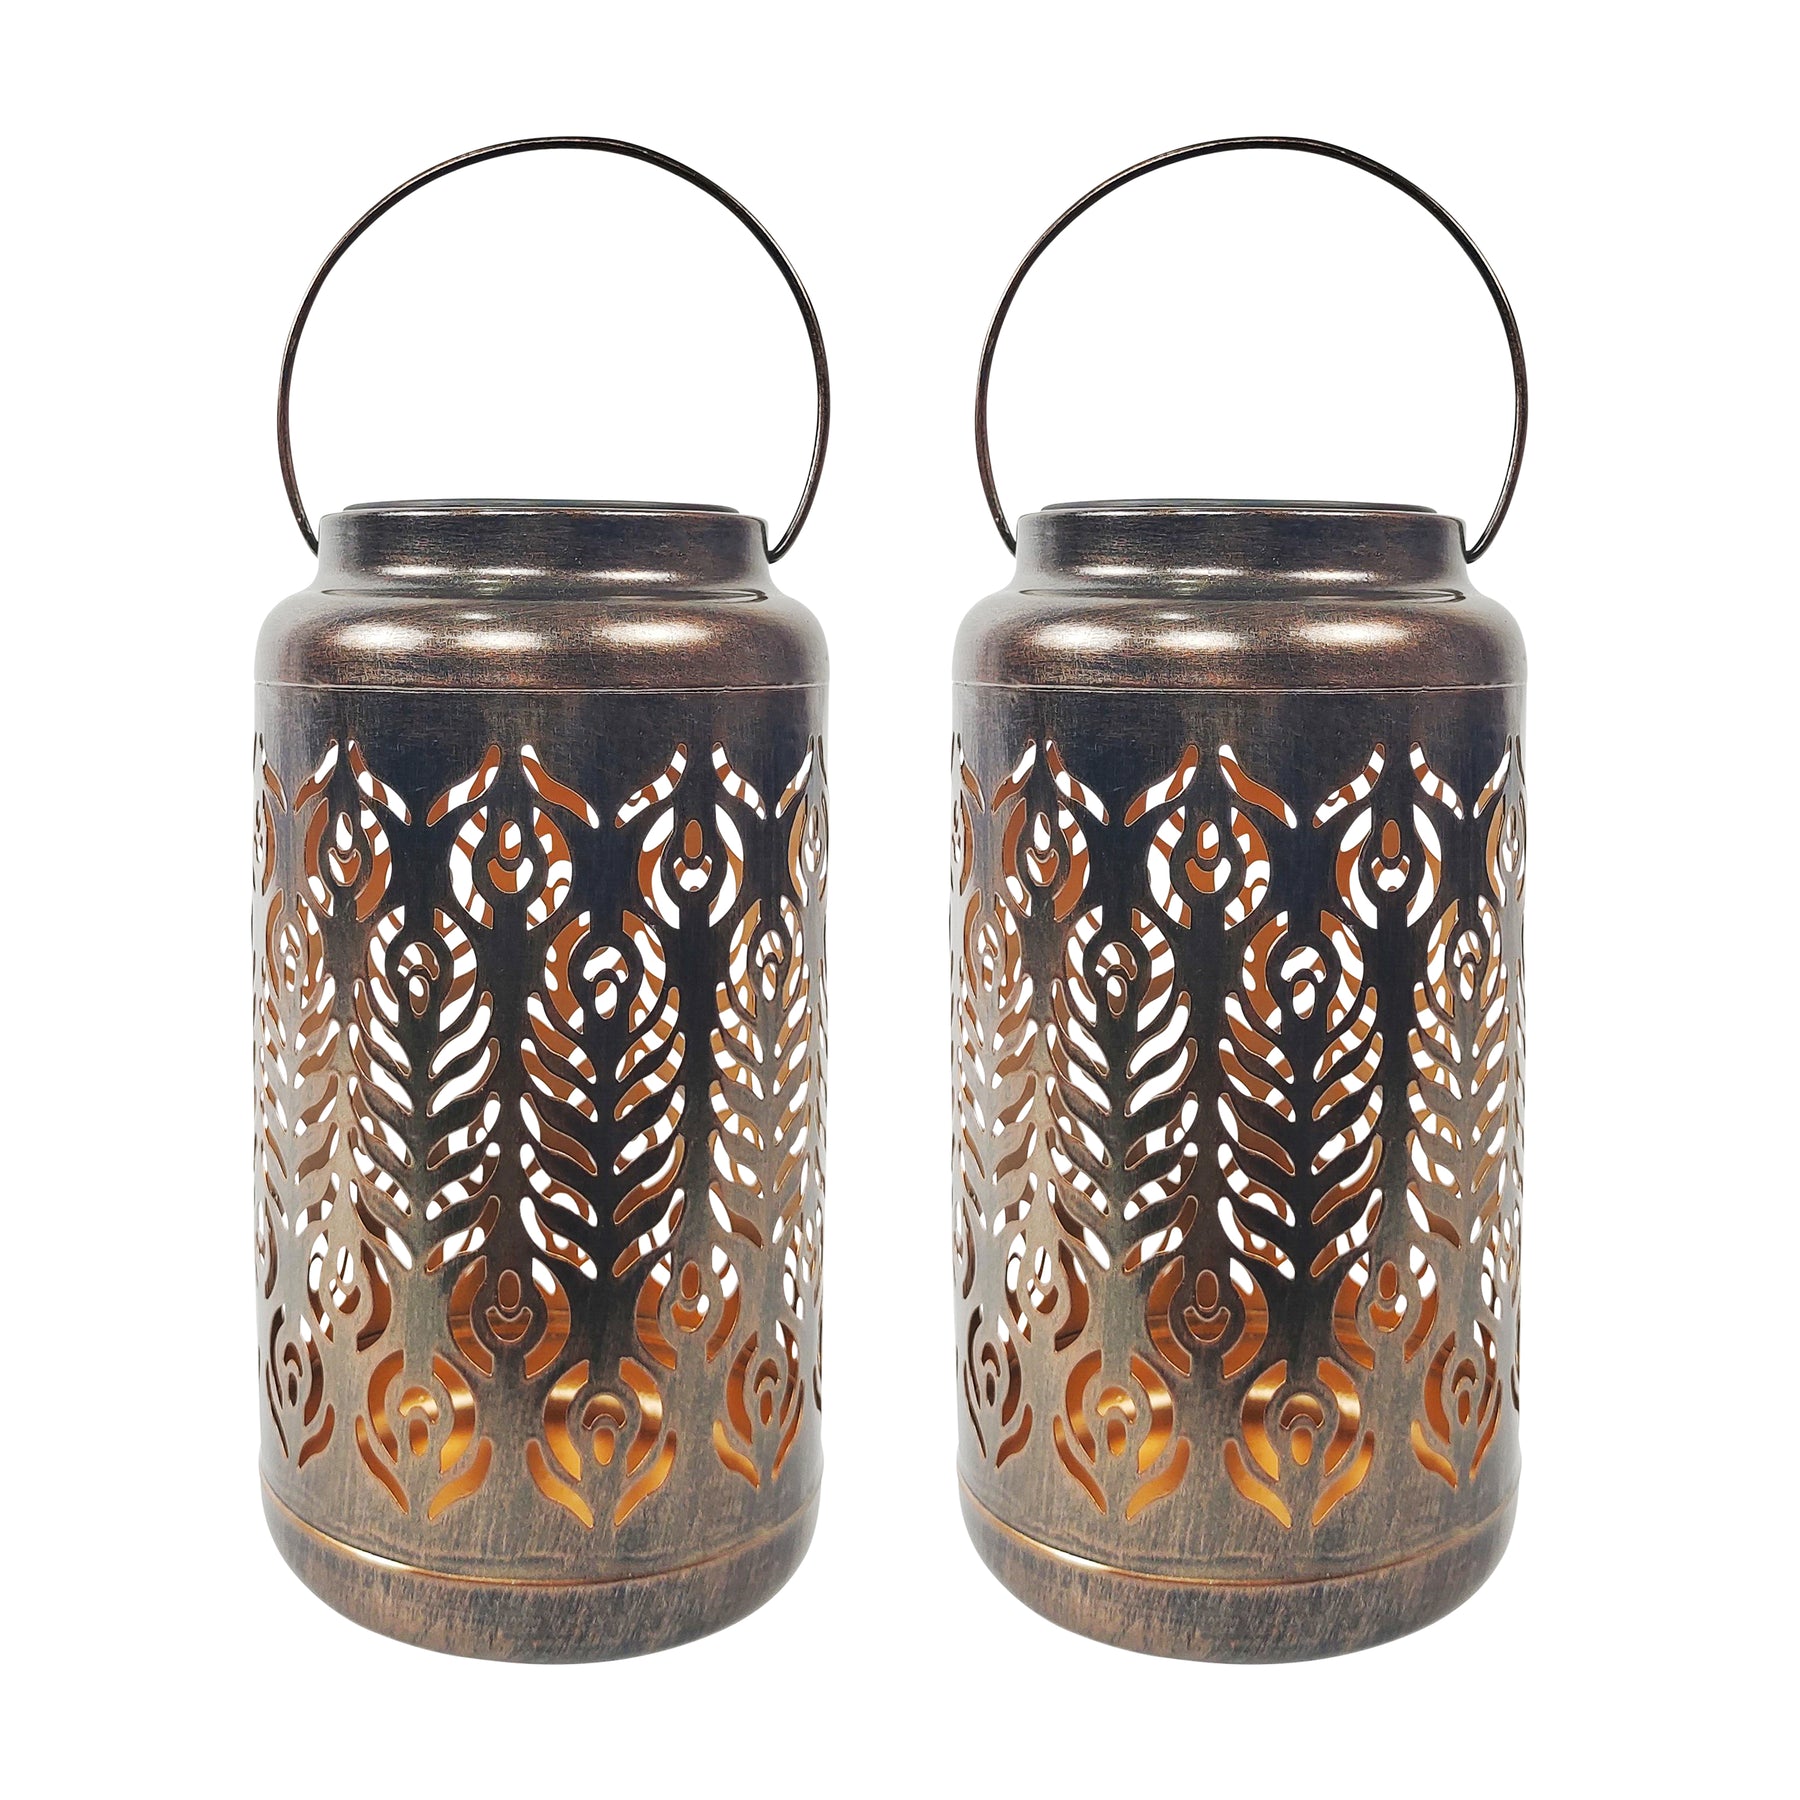 Bliss Outdoors 9-inch Tall 2-Pack Hanging and Tabletop Decorative Solar LED Lantern with Unique Phoenix Feather Design and Antique Hand Painted Finish in the Brushed Bronze variation.